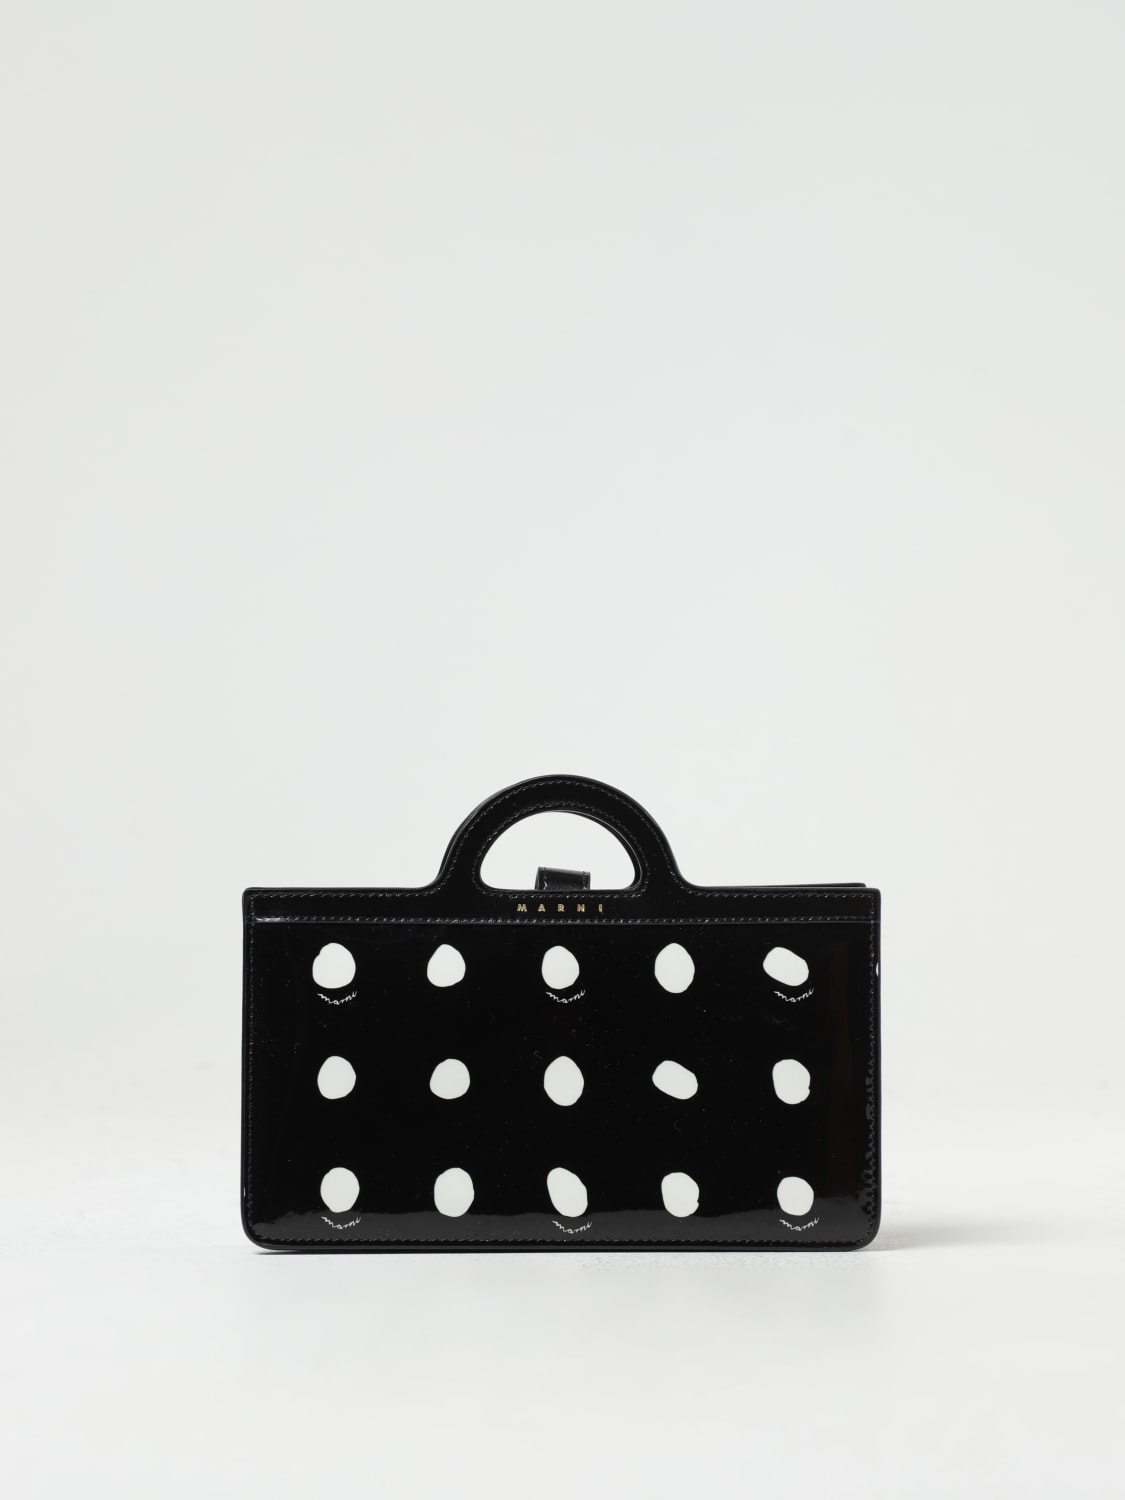 MARNI: Tropicalia wallet bag in patent leather with all-over polka